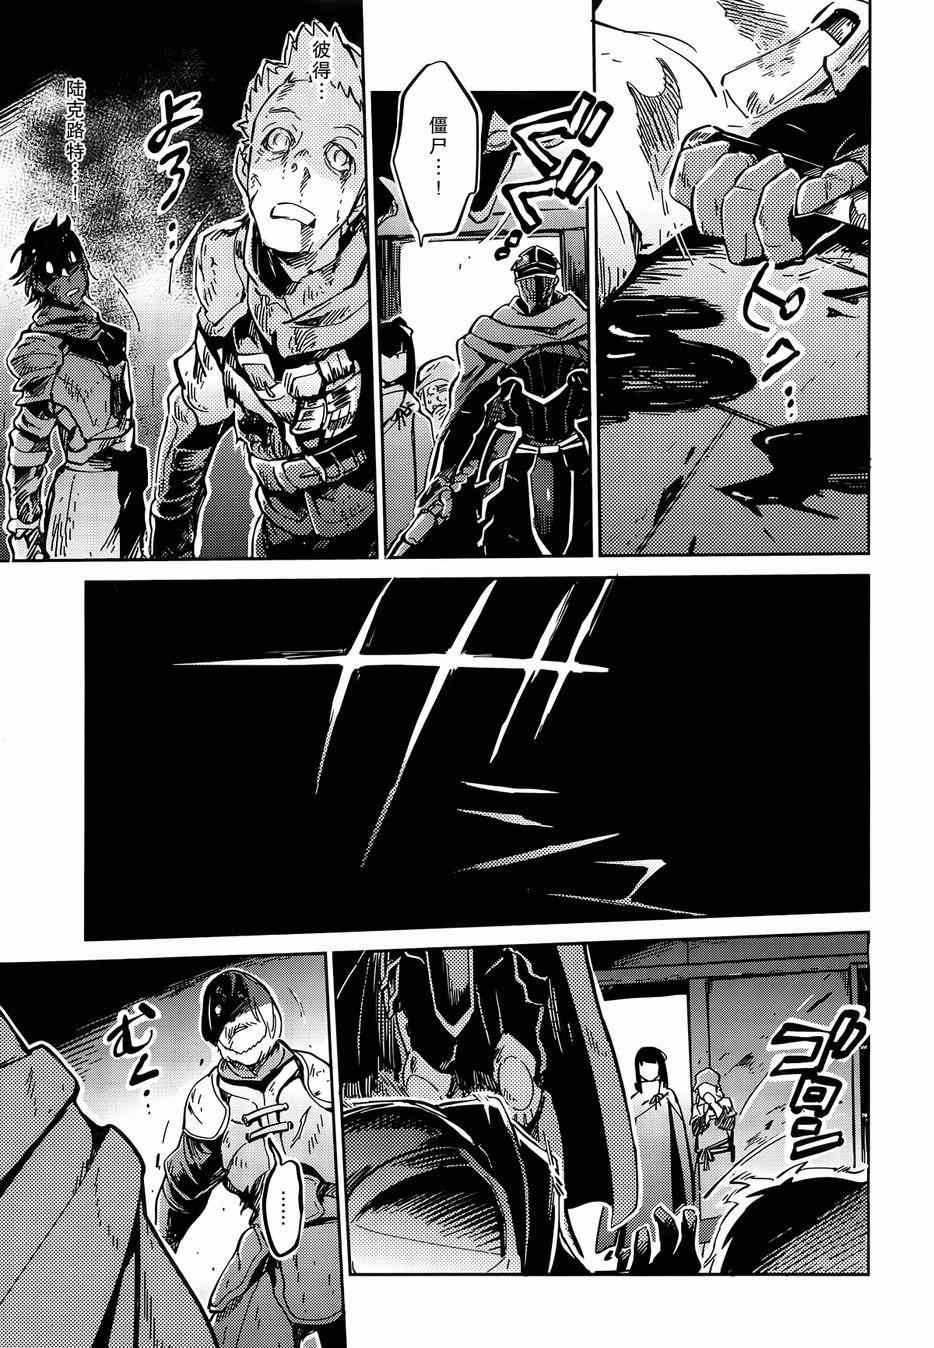 《OVERLORD》漫画 007话